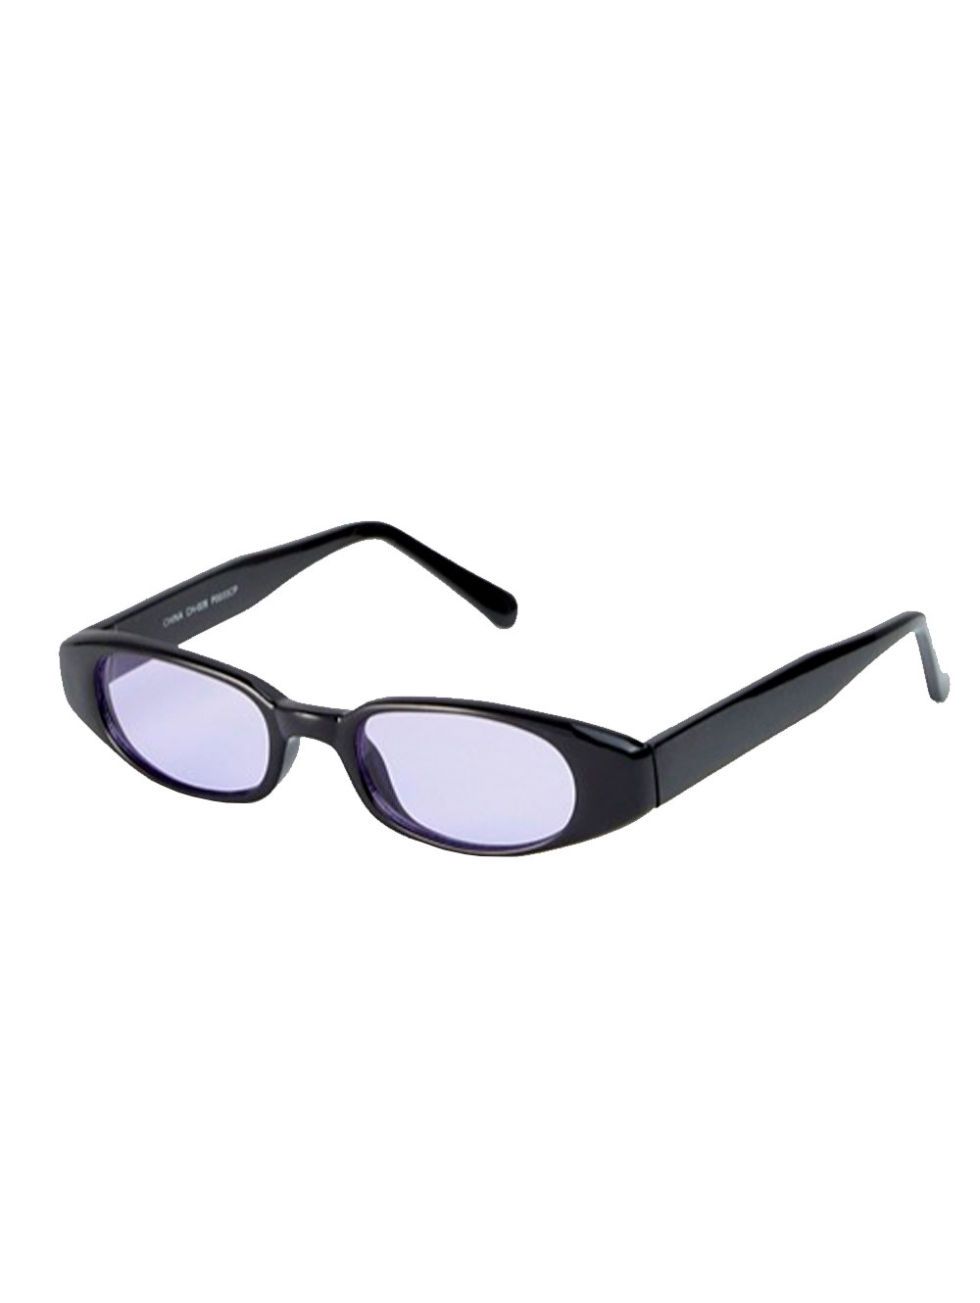 Eyewear, Sunglasses, Glasses, Personal protective equipment, Vision care, Violet, Purple, Transparent material, Goggles, Line, 